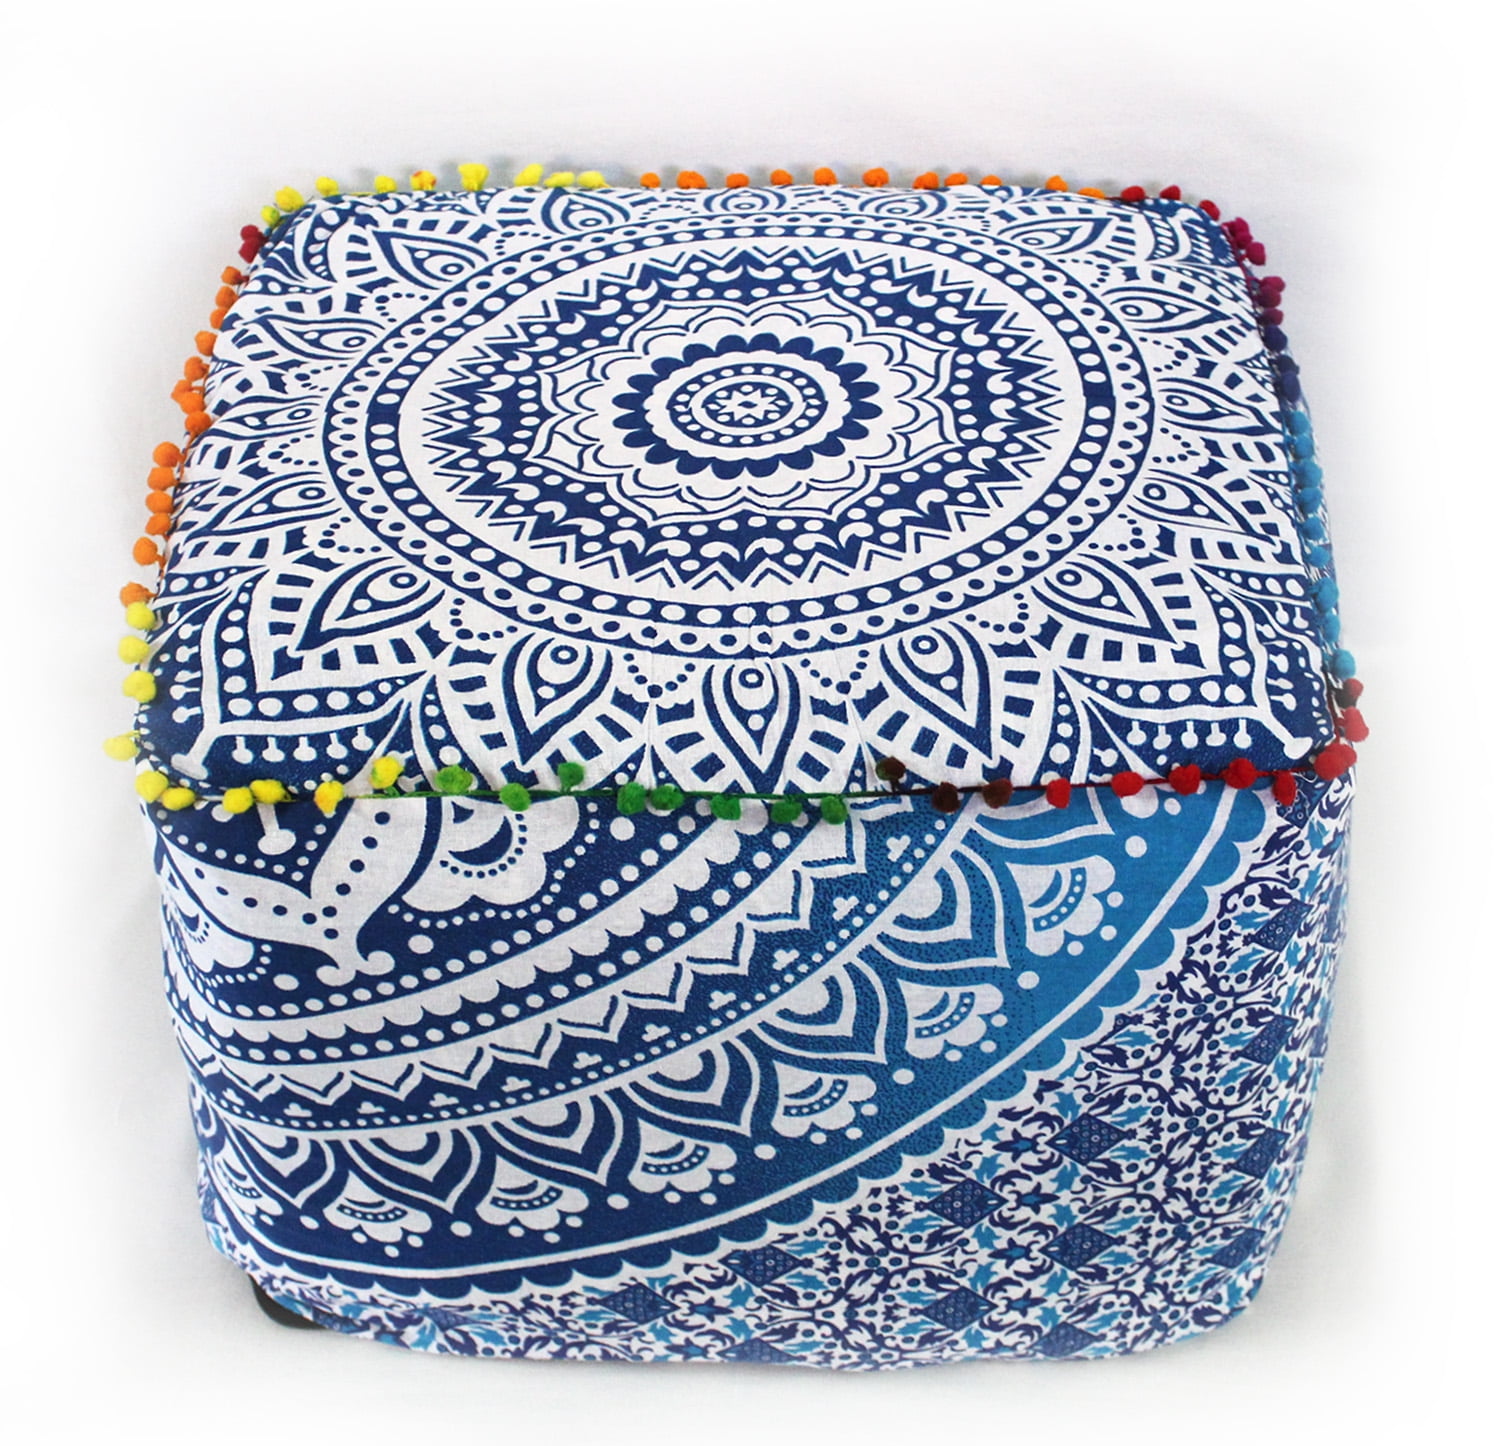 New Indian Mandala Square Cushion Cover Large Ped Bed Covers Floor Pillow Cover 